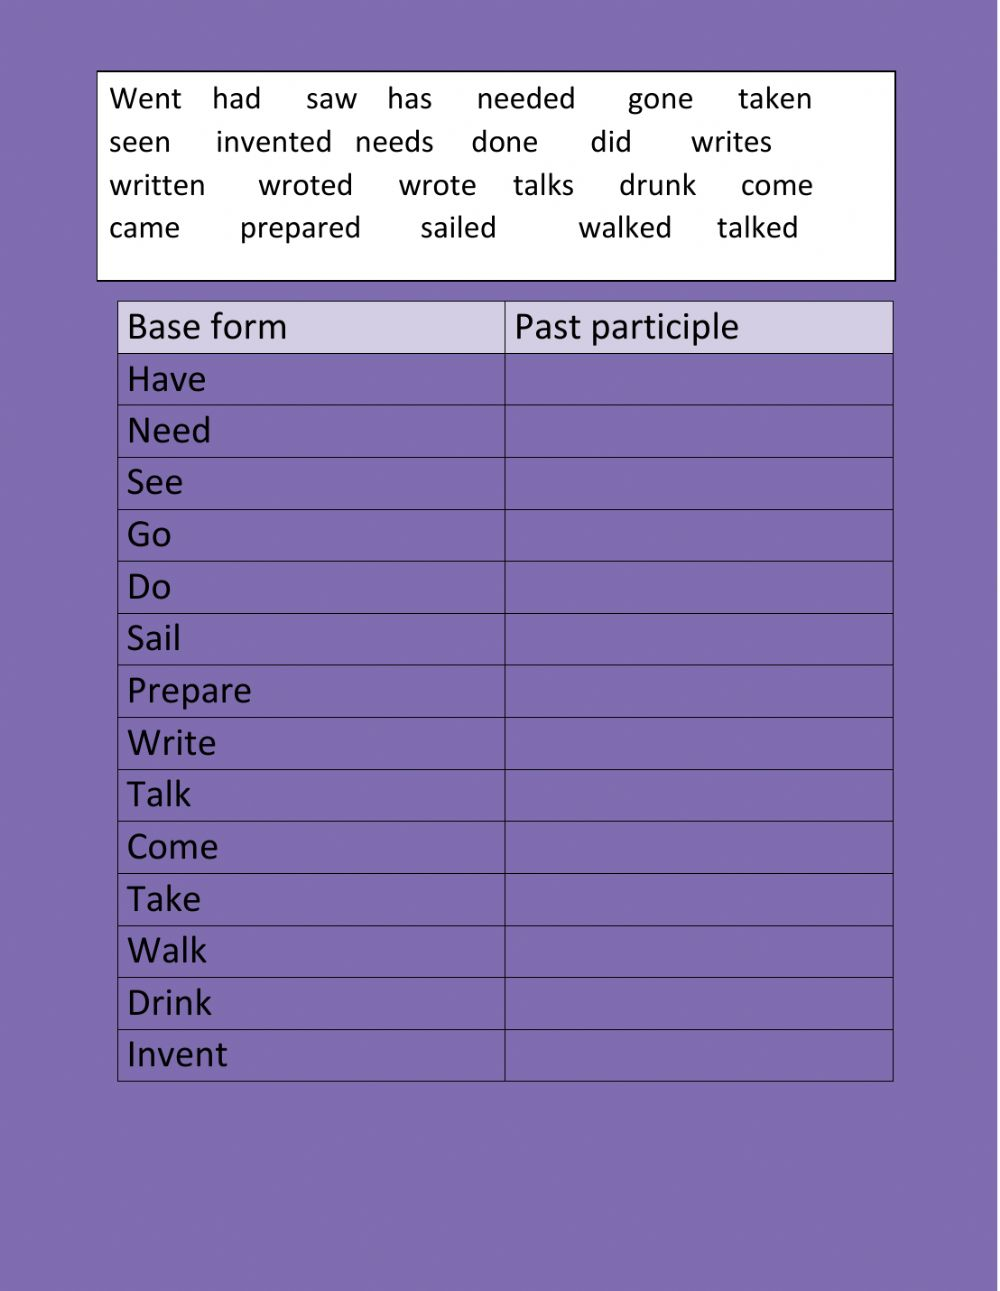 past-participle-as-adjective-worksheet-pdf-adjectiveworksheets